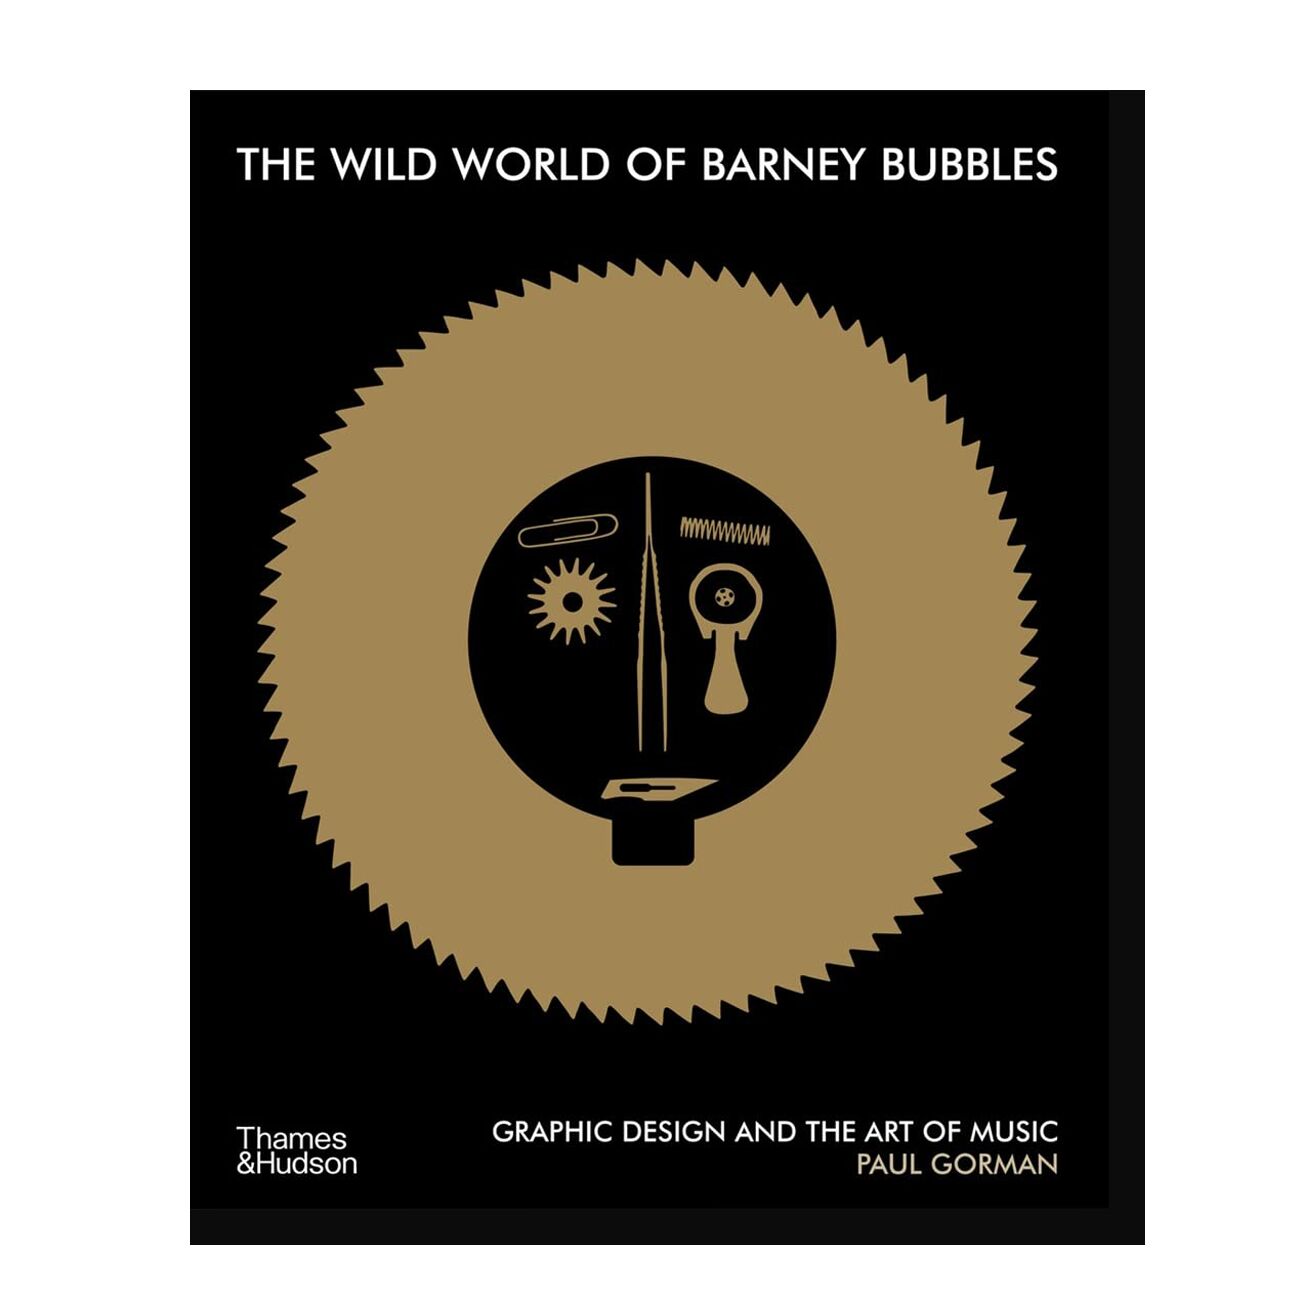 The Wild World of Barney Bubbles: Graphic Design and the Art of Music